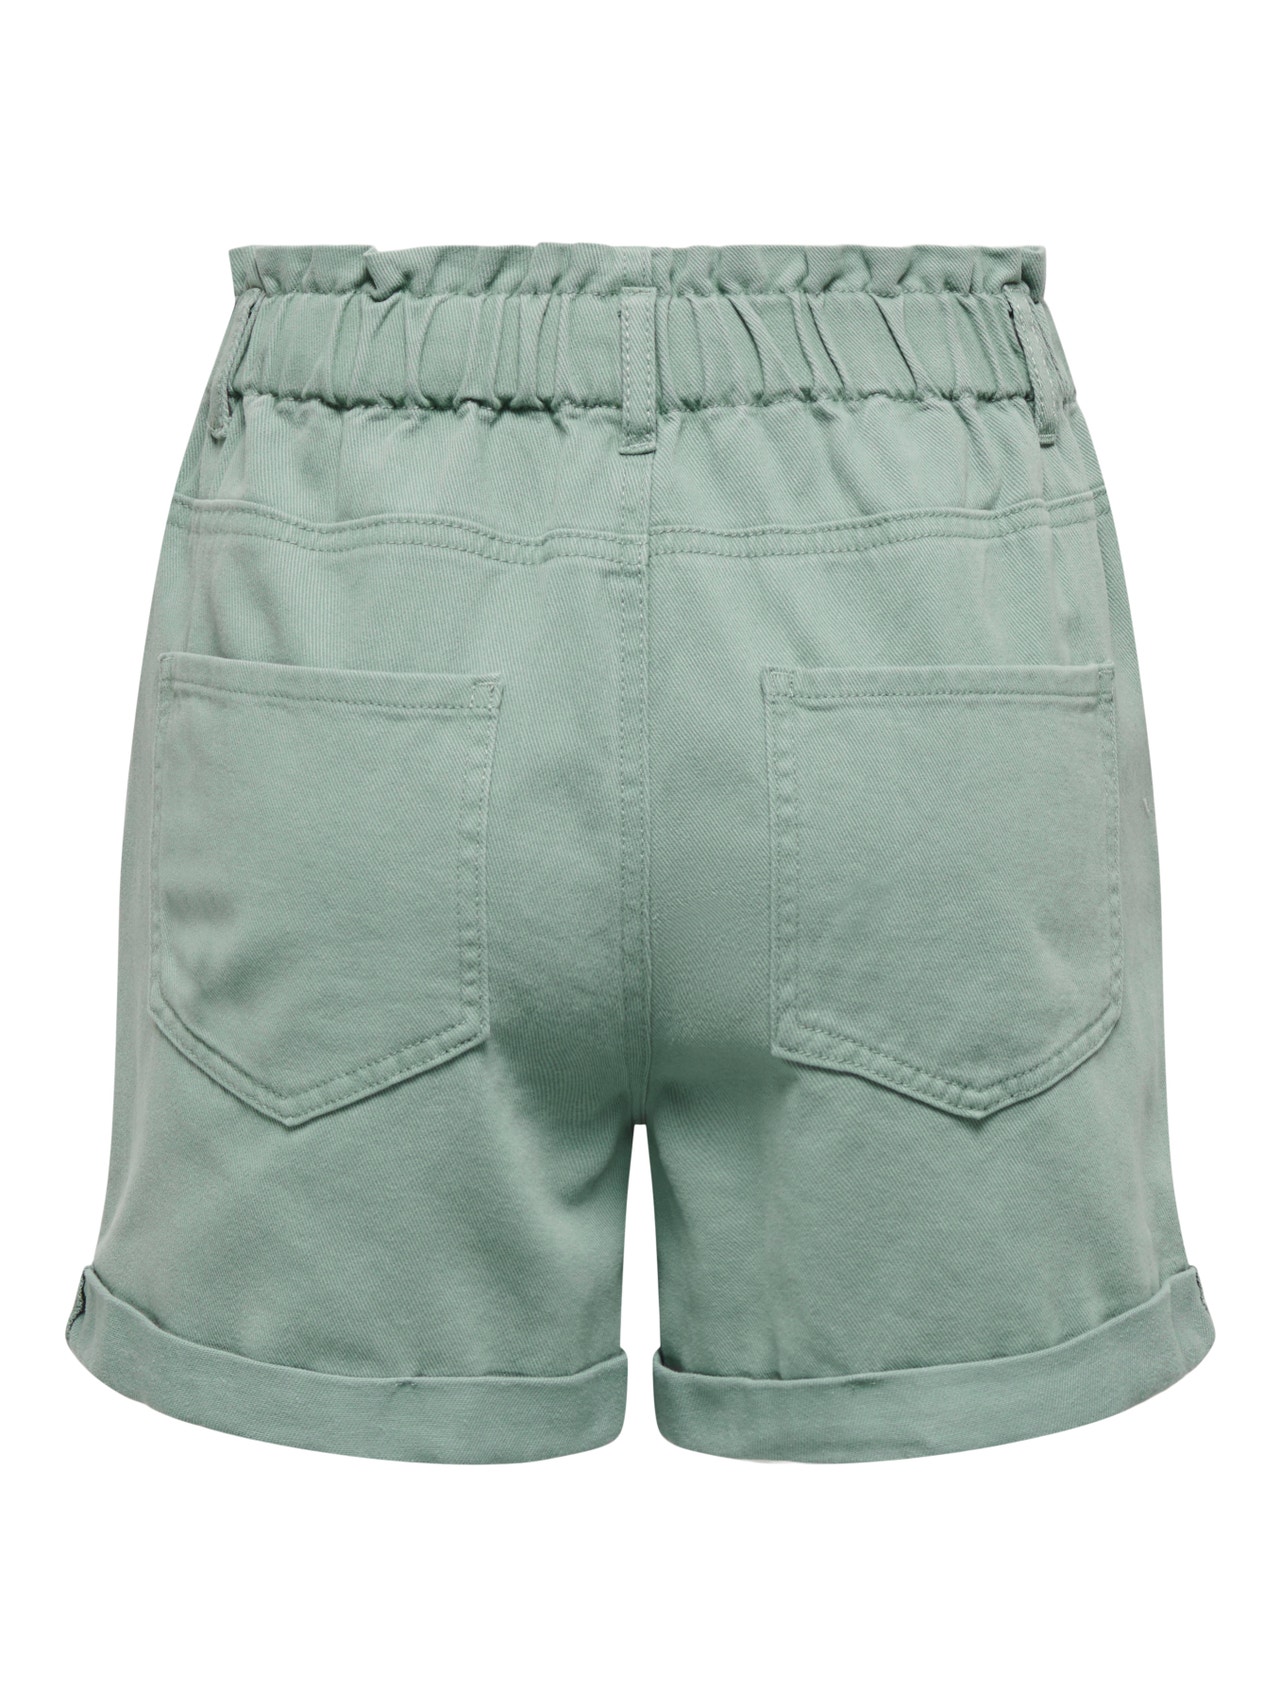 ONLY High-waist Shorts -Chinois Green - 15257540